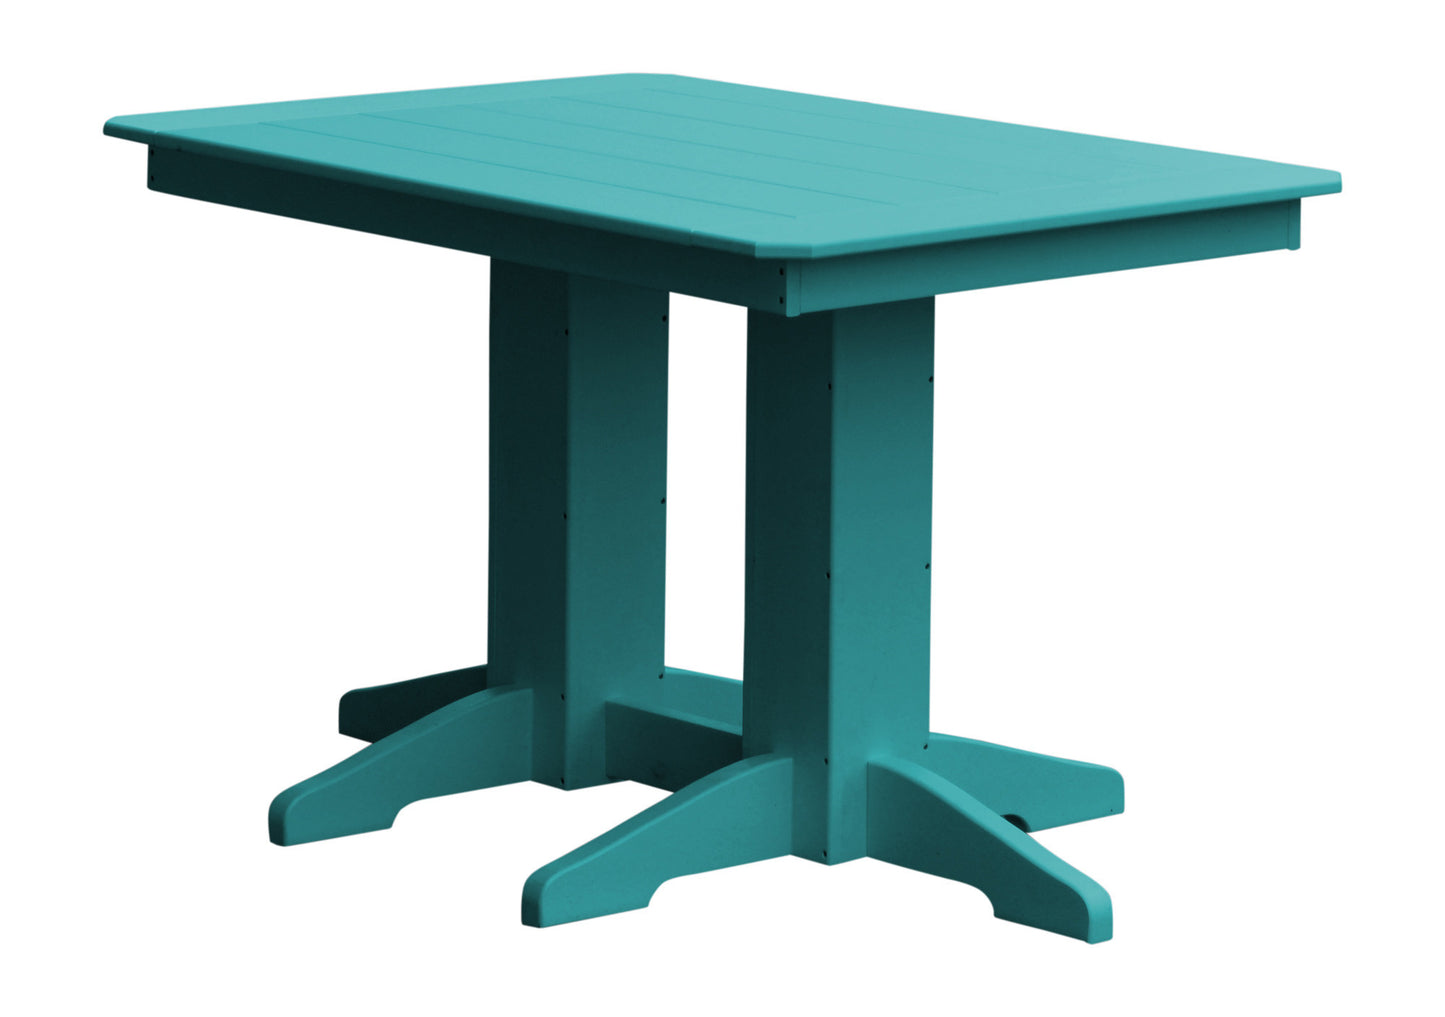 A&L Furniture Company Recycled Plastic 4' Dining Table - Aruba Blue